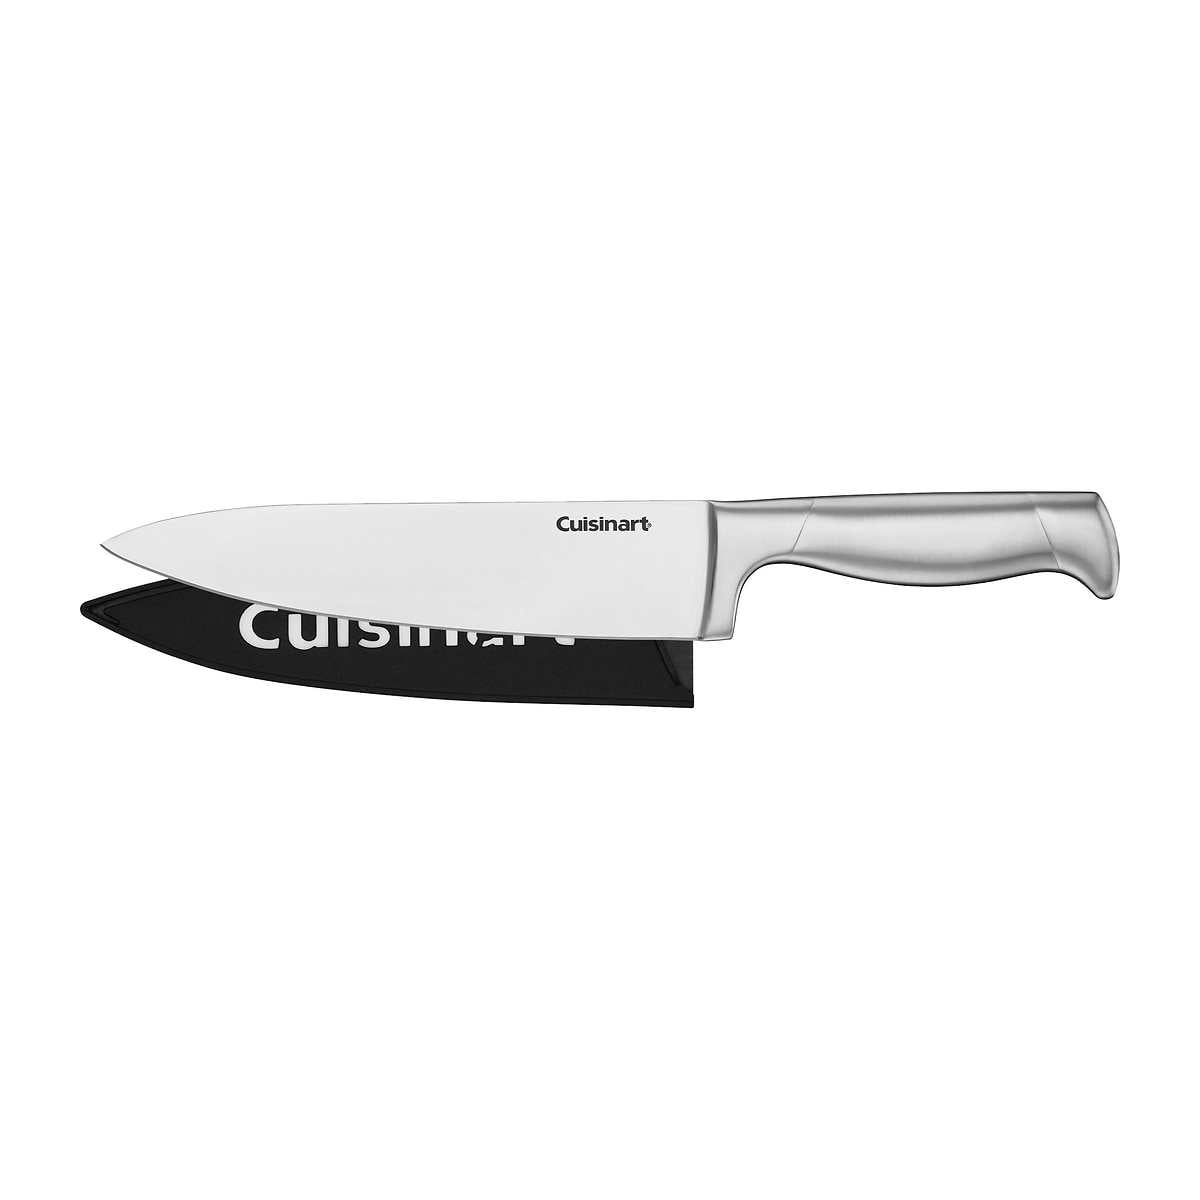 Cuisinart Elite Set Of 5 Different Chef's Knives #17550F 0617 See All Photos